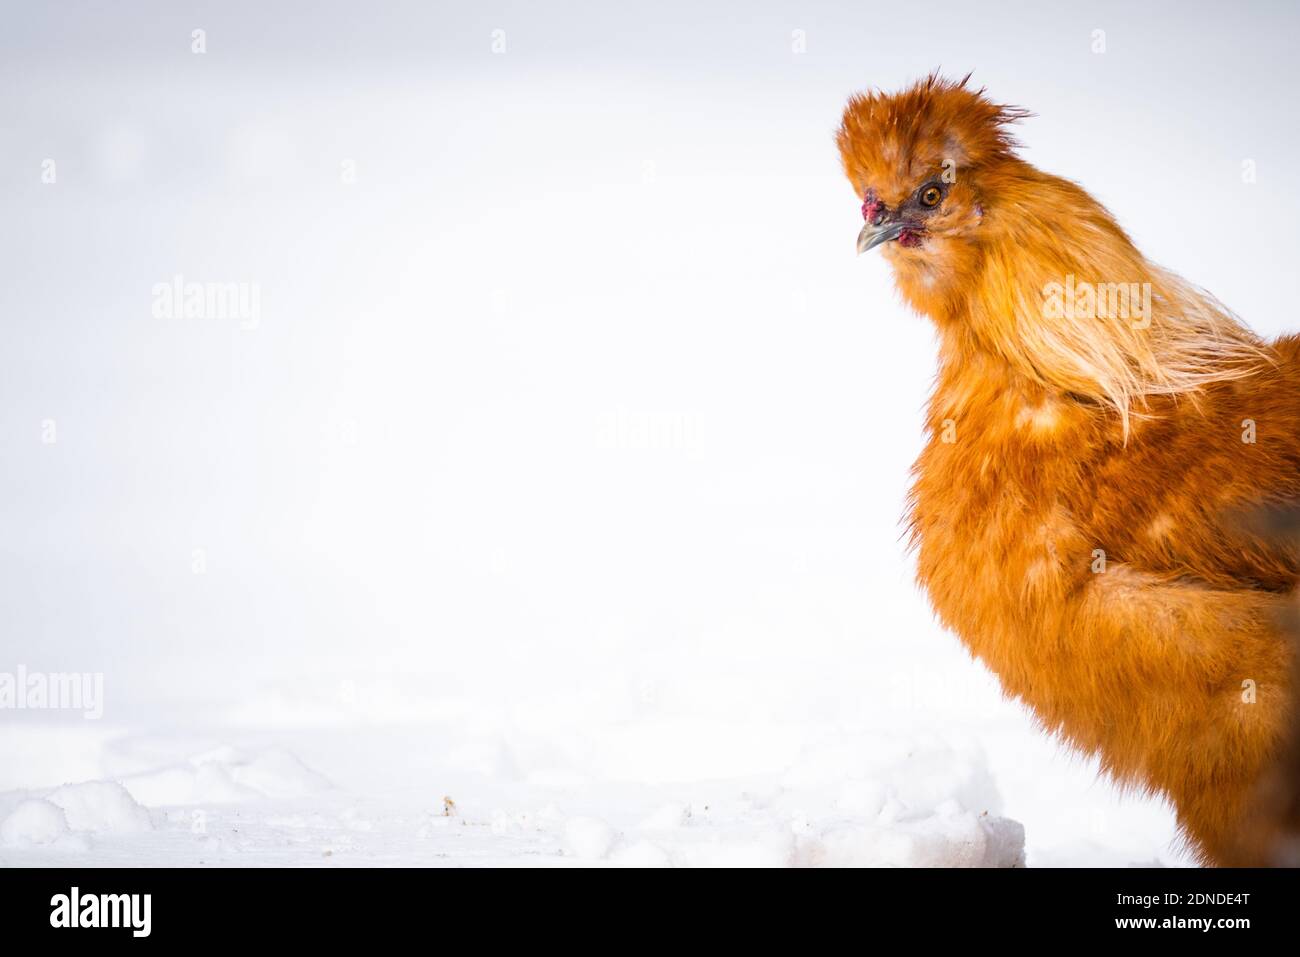 An isolated portrait of a Silkie chicken in snow. Credit: Chris Baker Evens Stock Photo